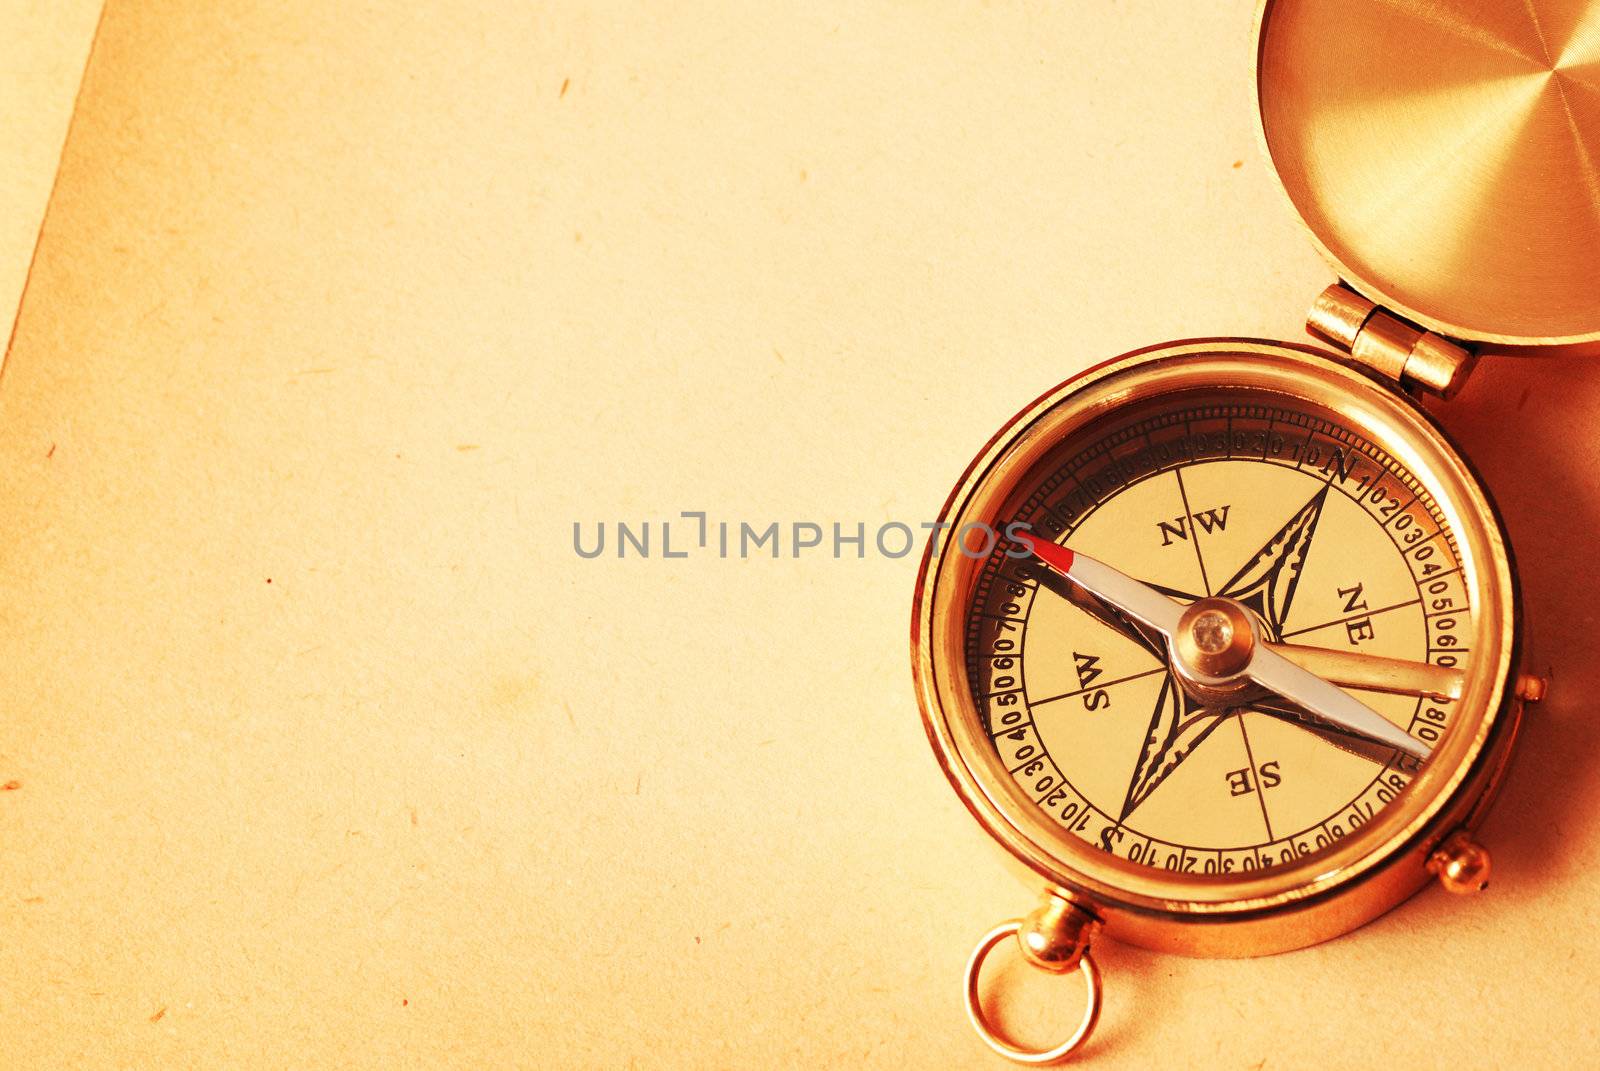 Antique brass compass over old background by haveseen